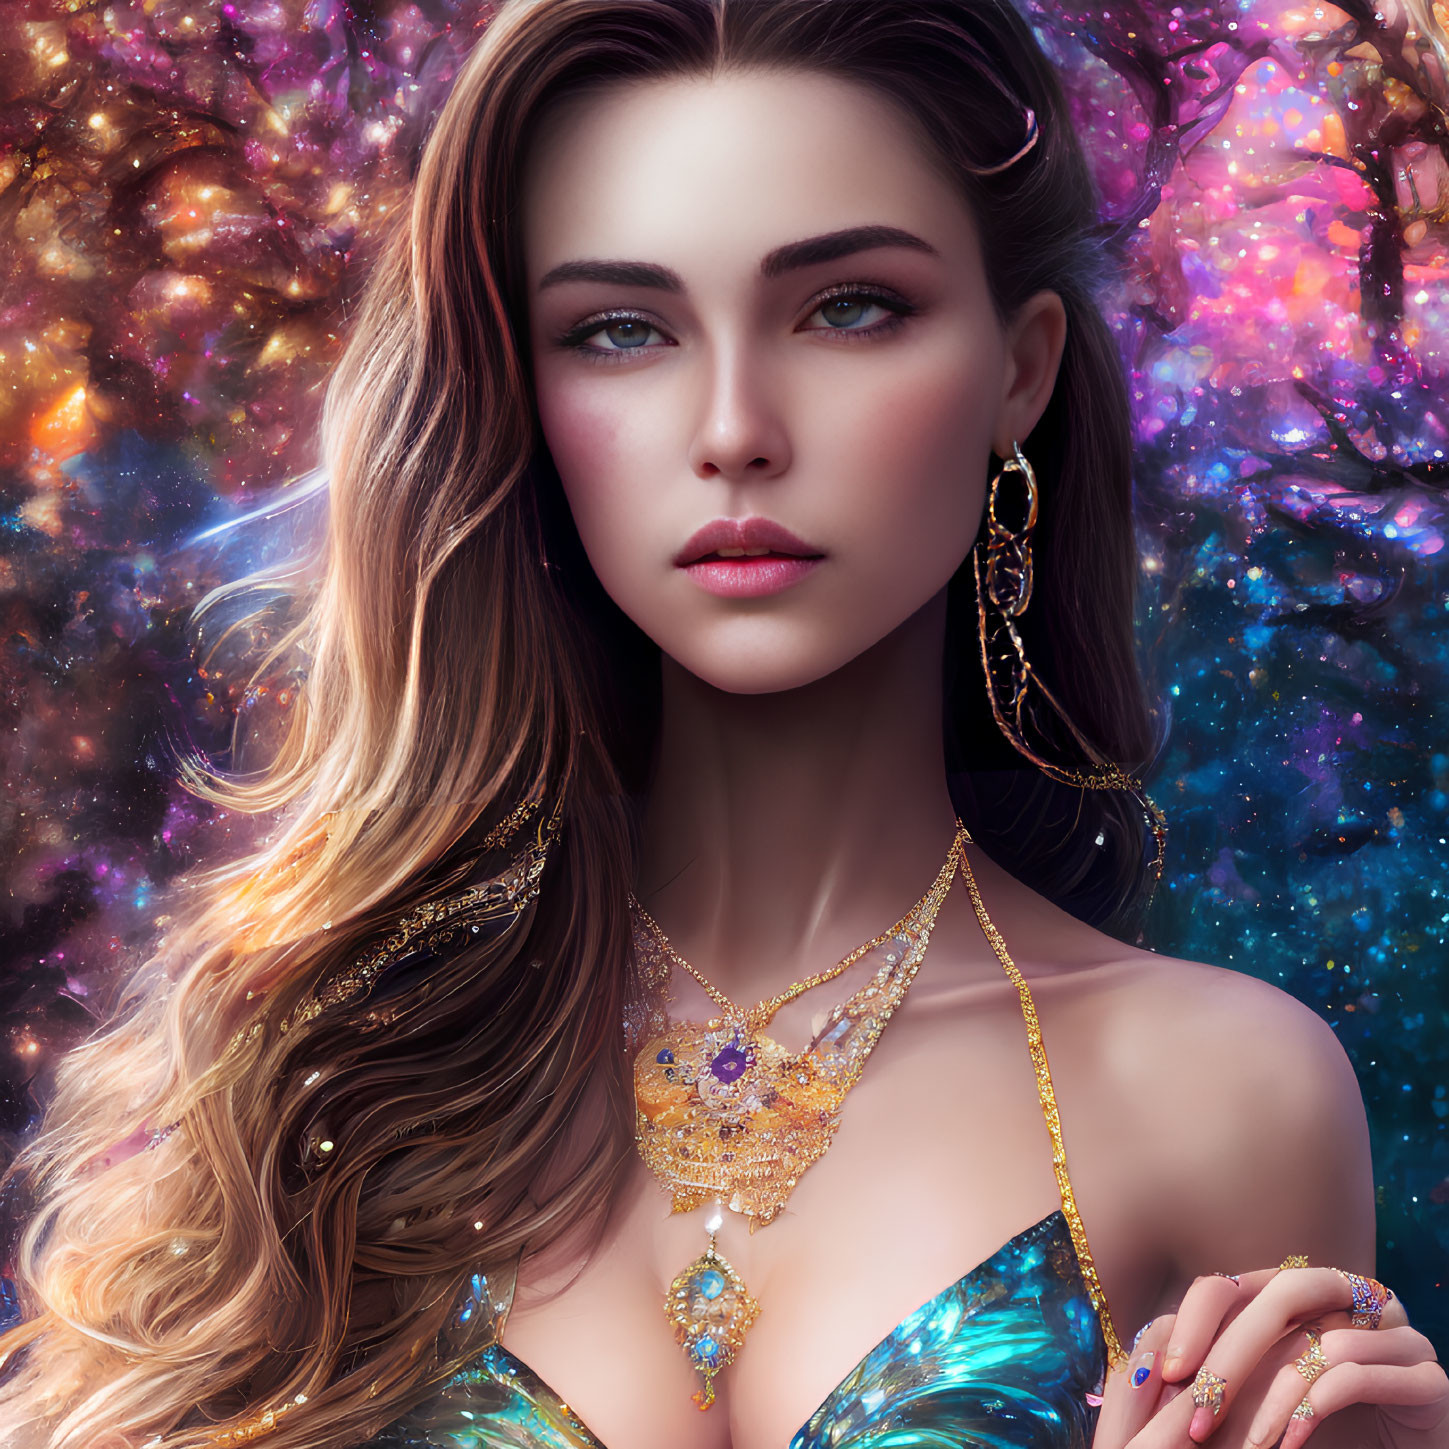 Striking blue-eyed woman with long wavy hair in cosmic setting with ornate jewelry